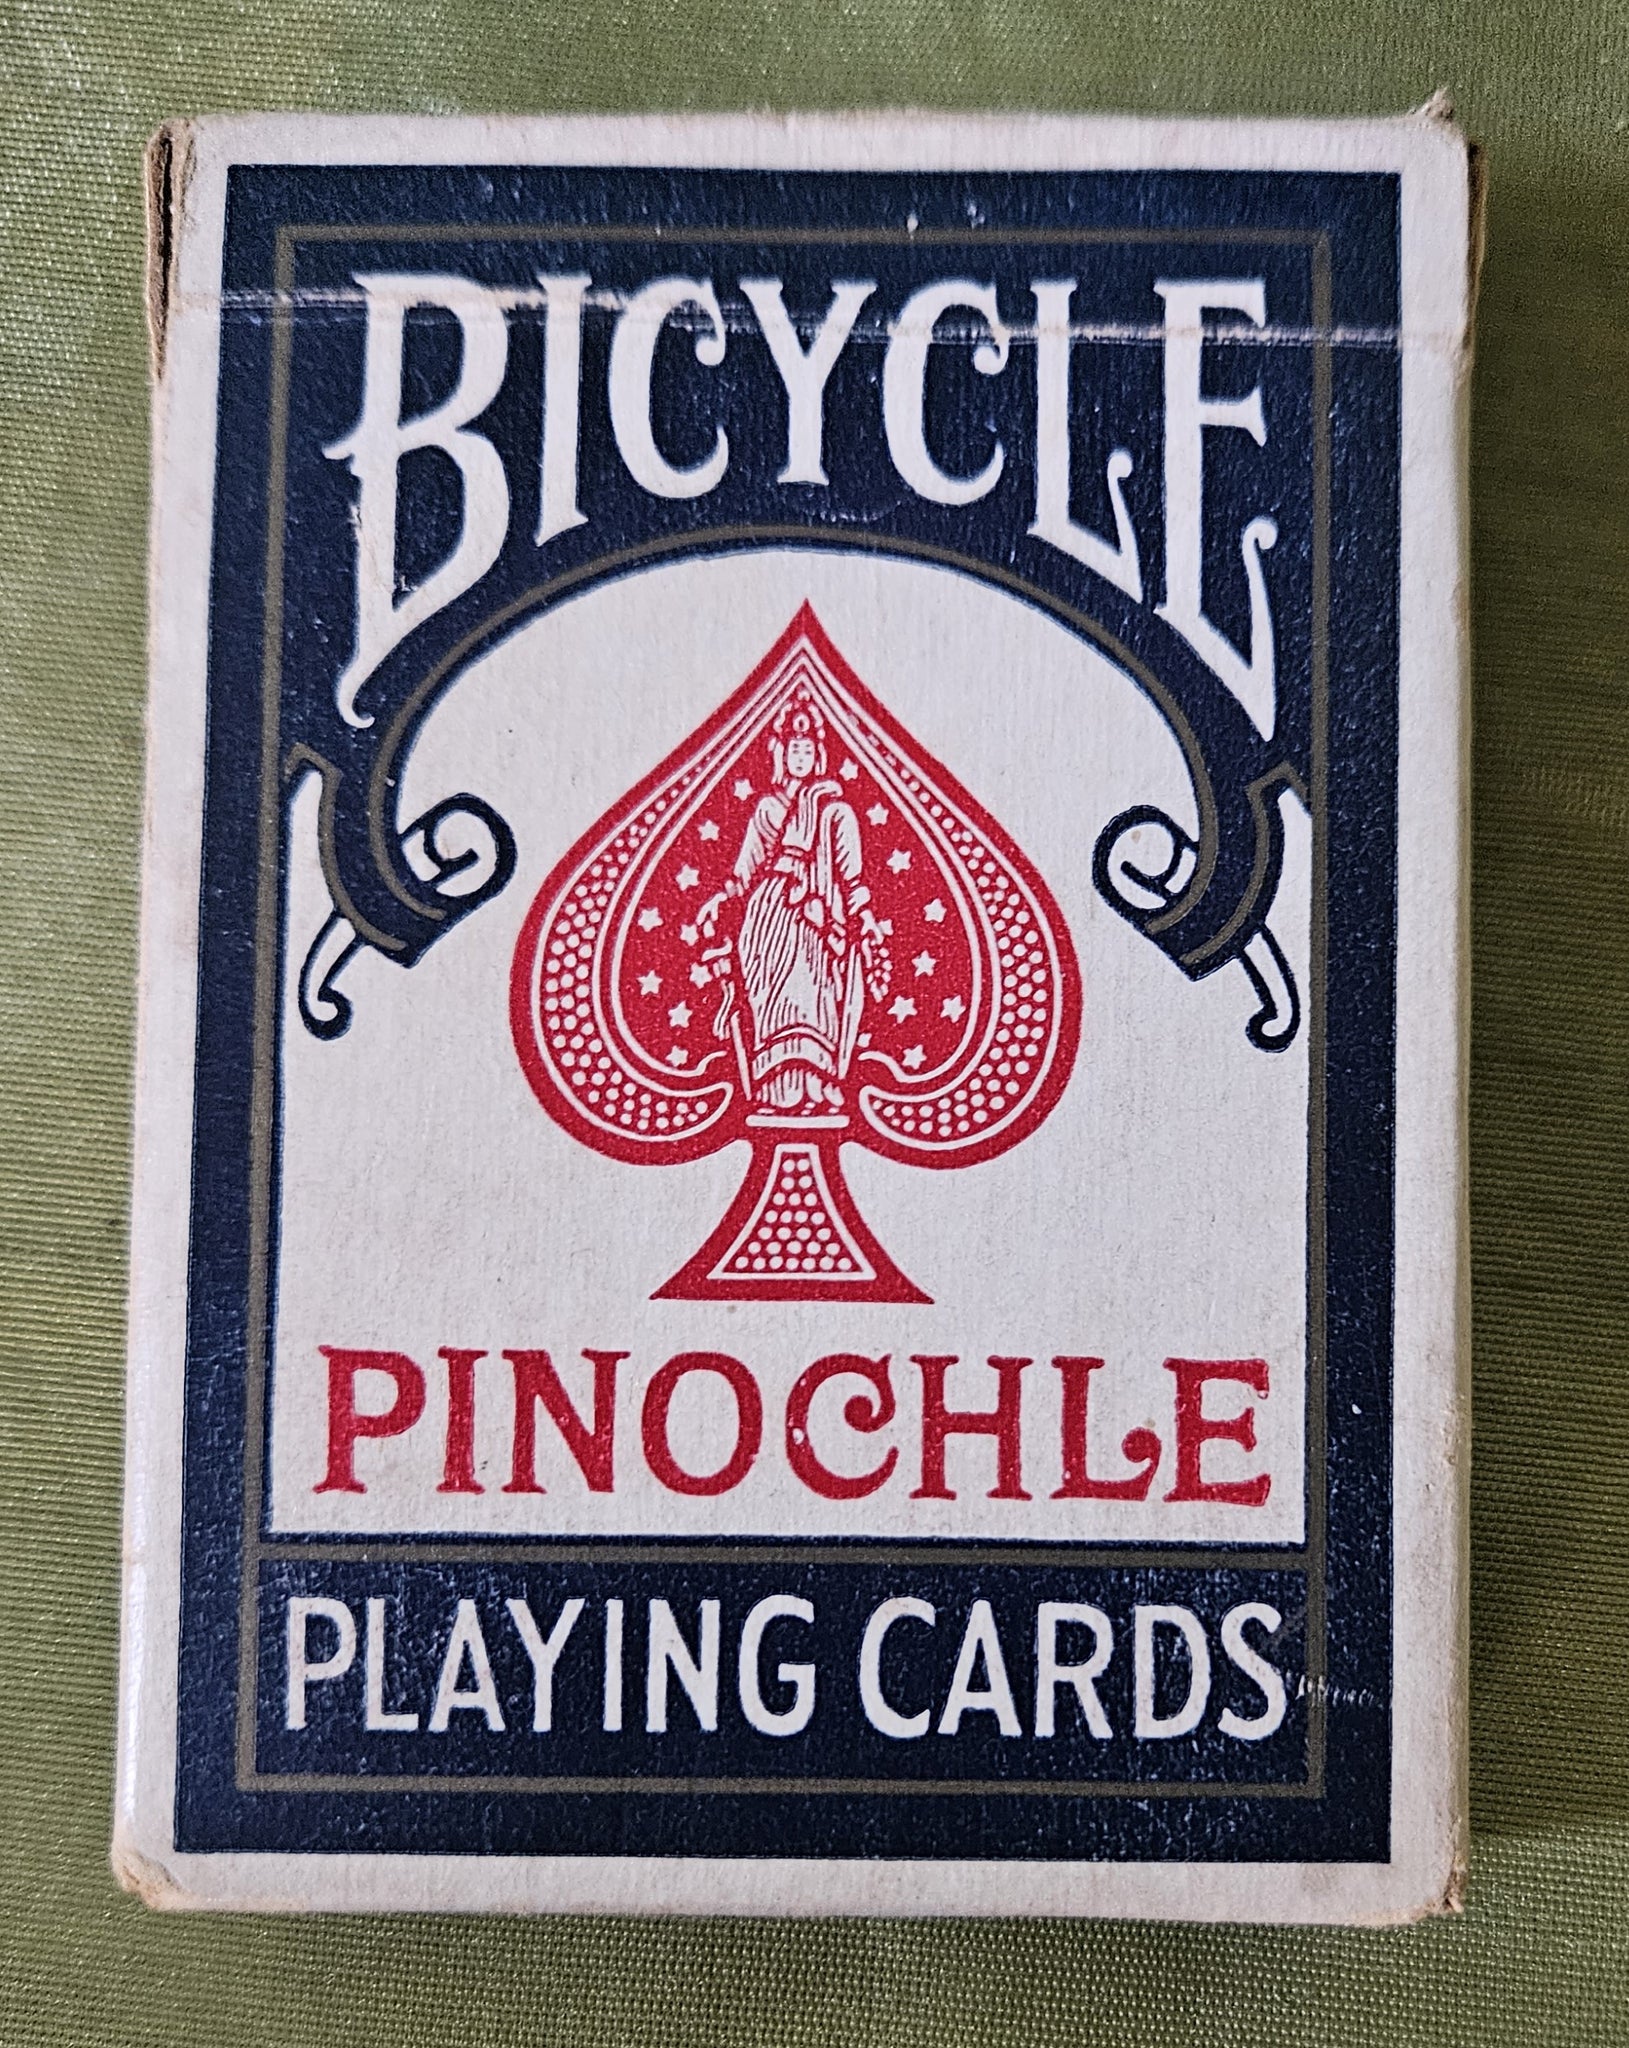 Vintage Pinochle Playing Cards